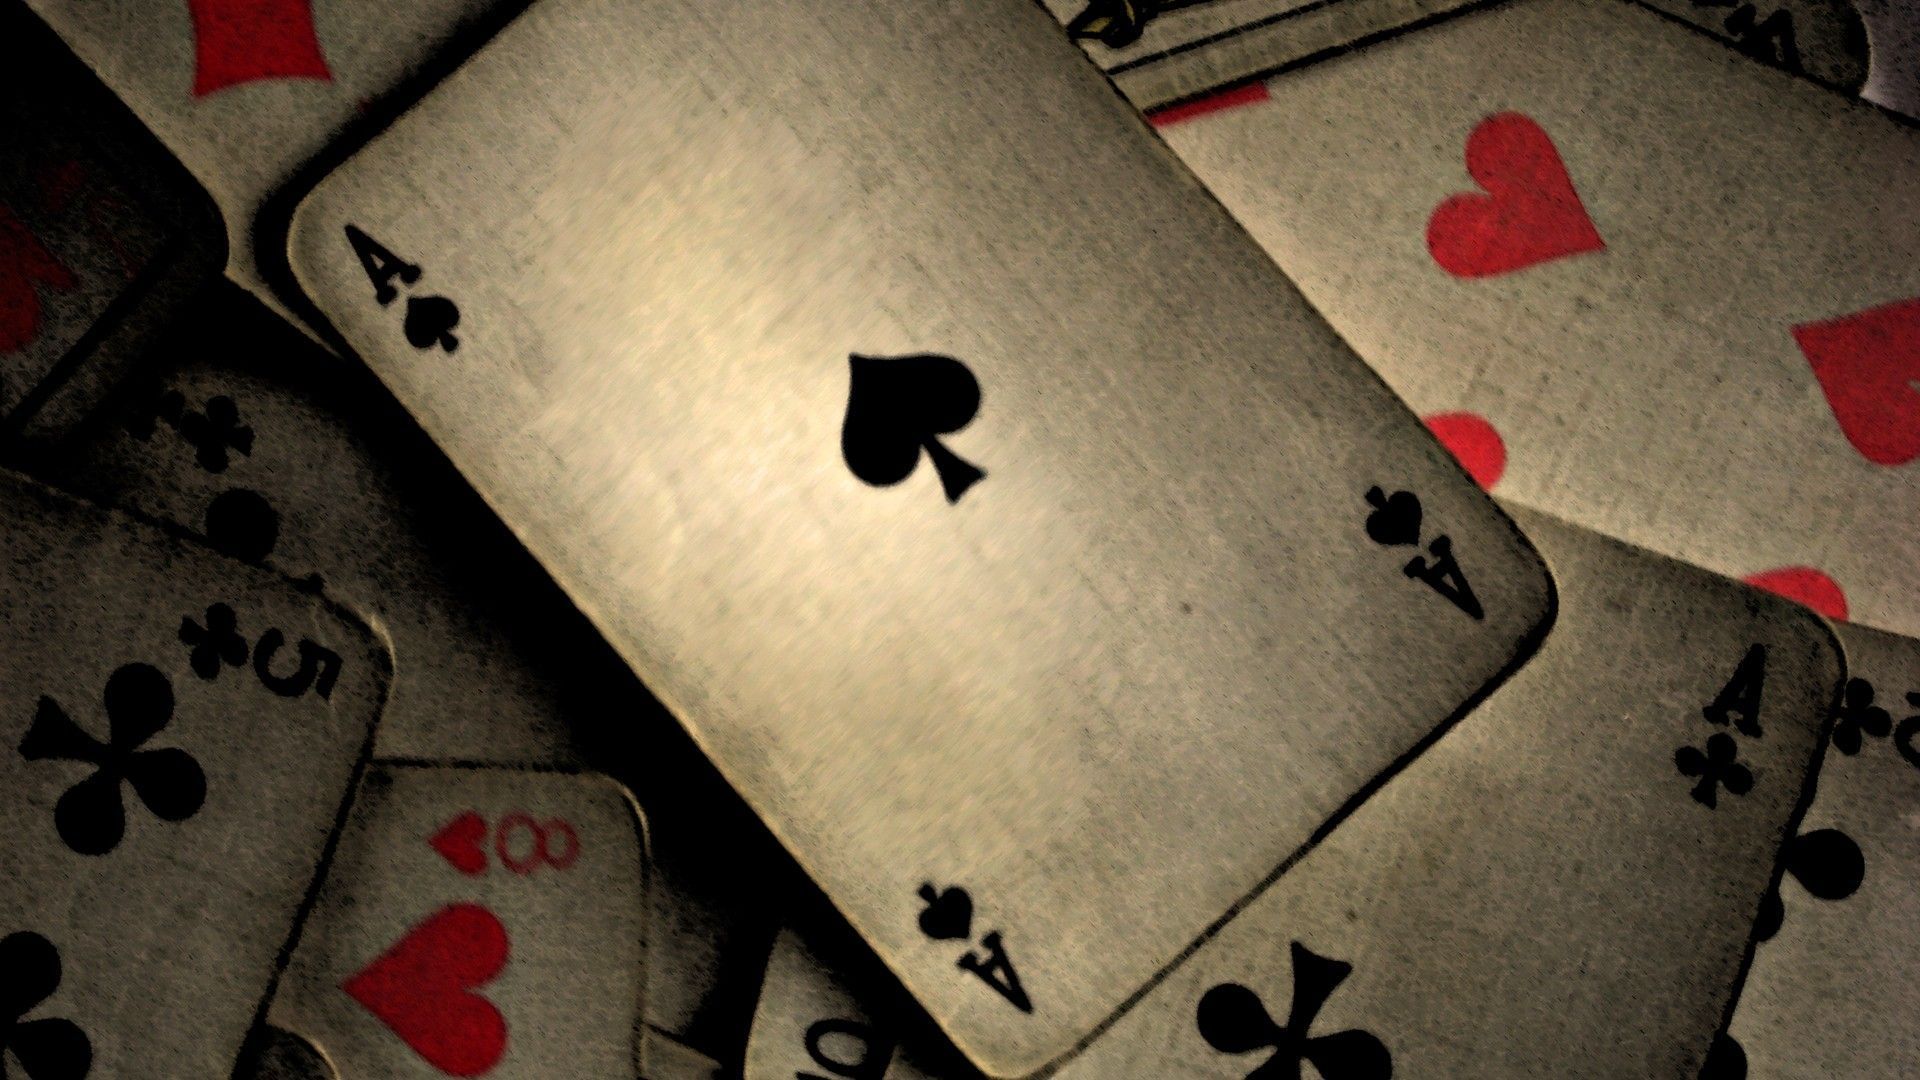 Royalcasino88 Online Poker: Strategy and Fun Combined